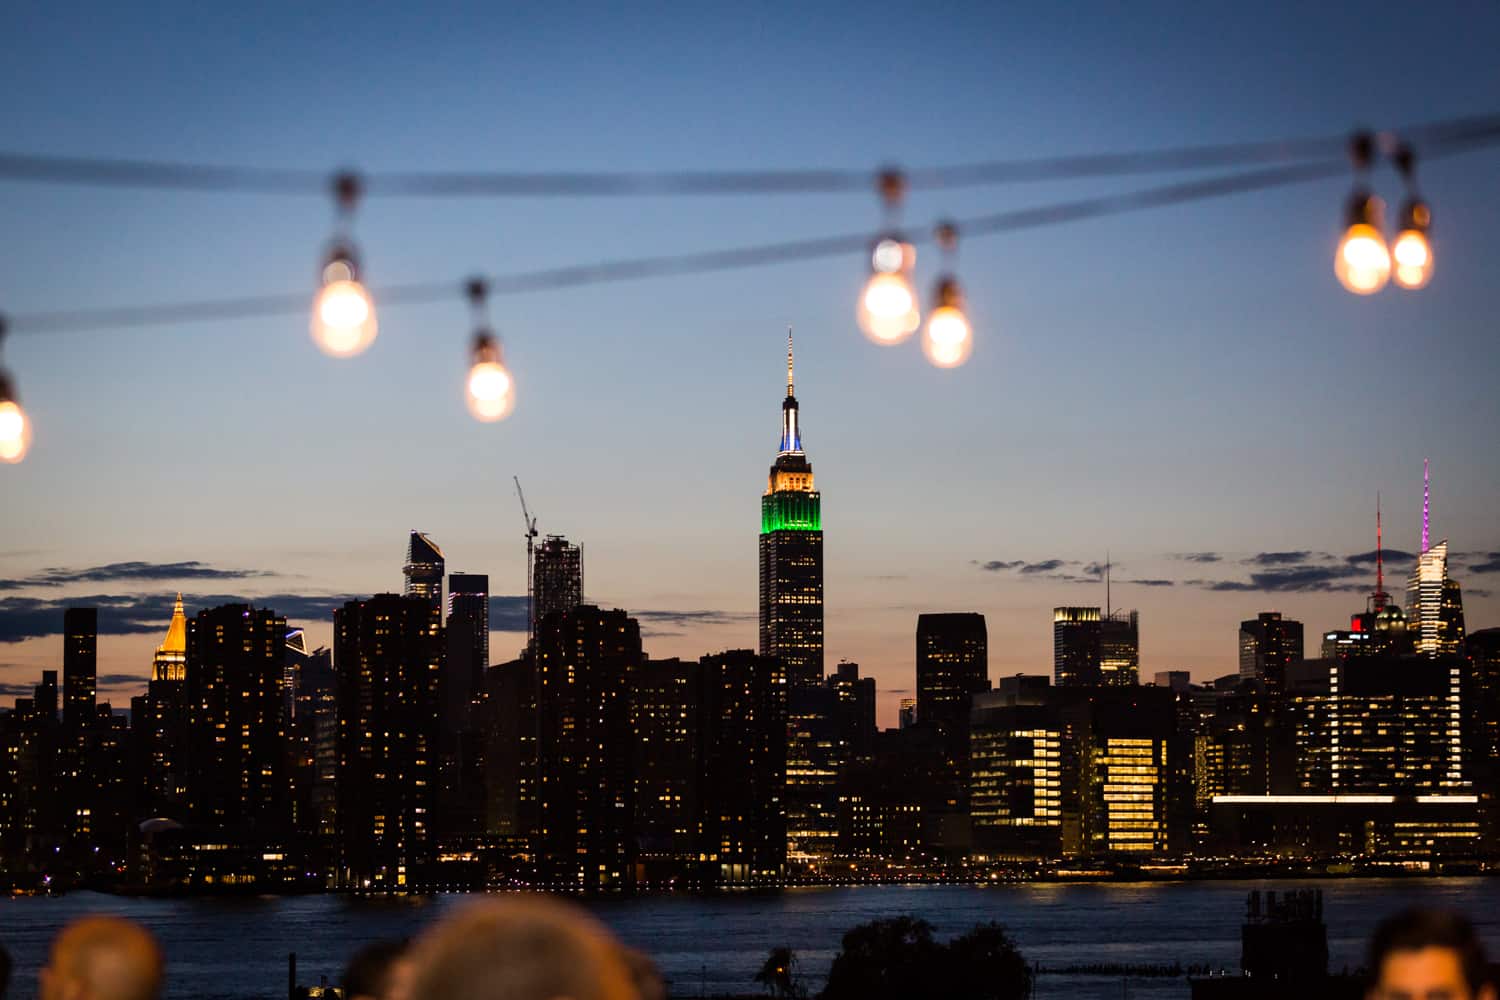 Rooftop view of Empire State Building with strings of lights at dusk